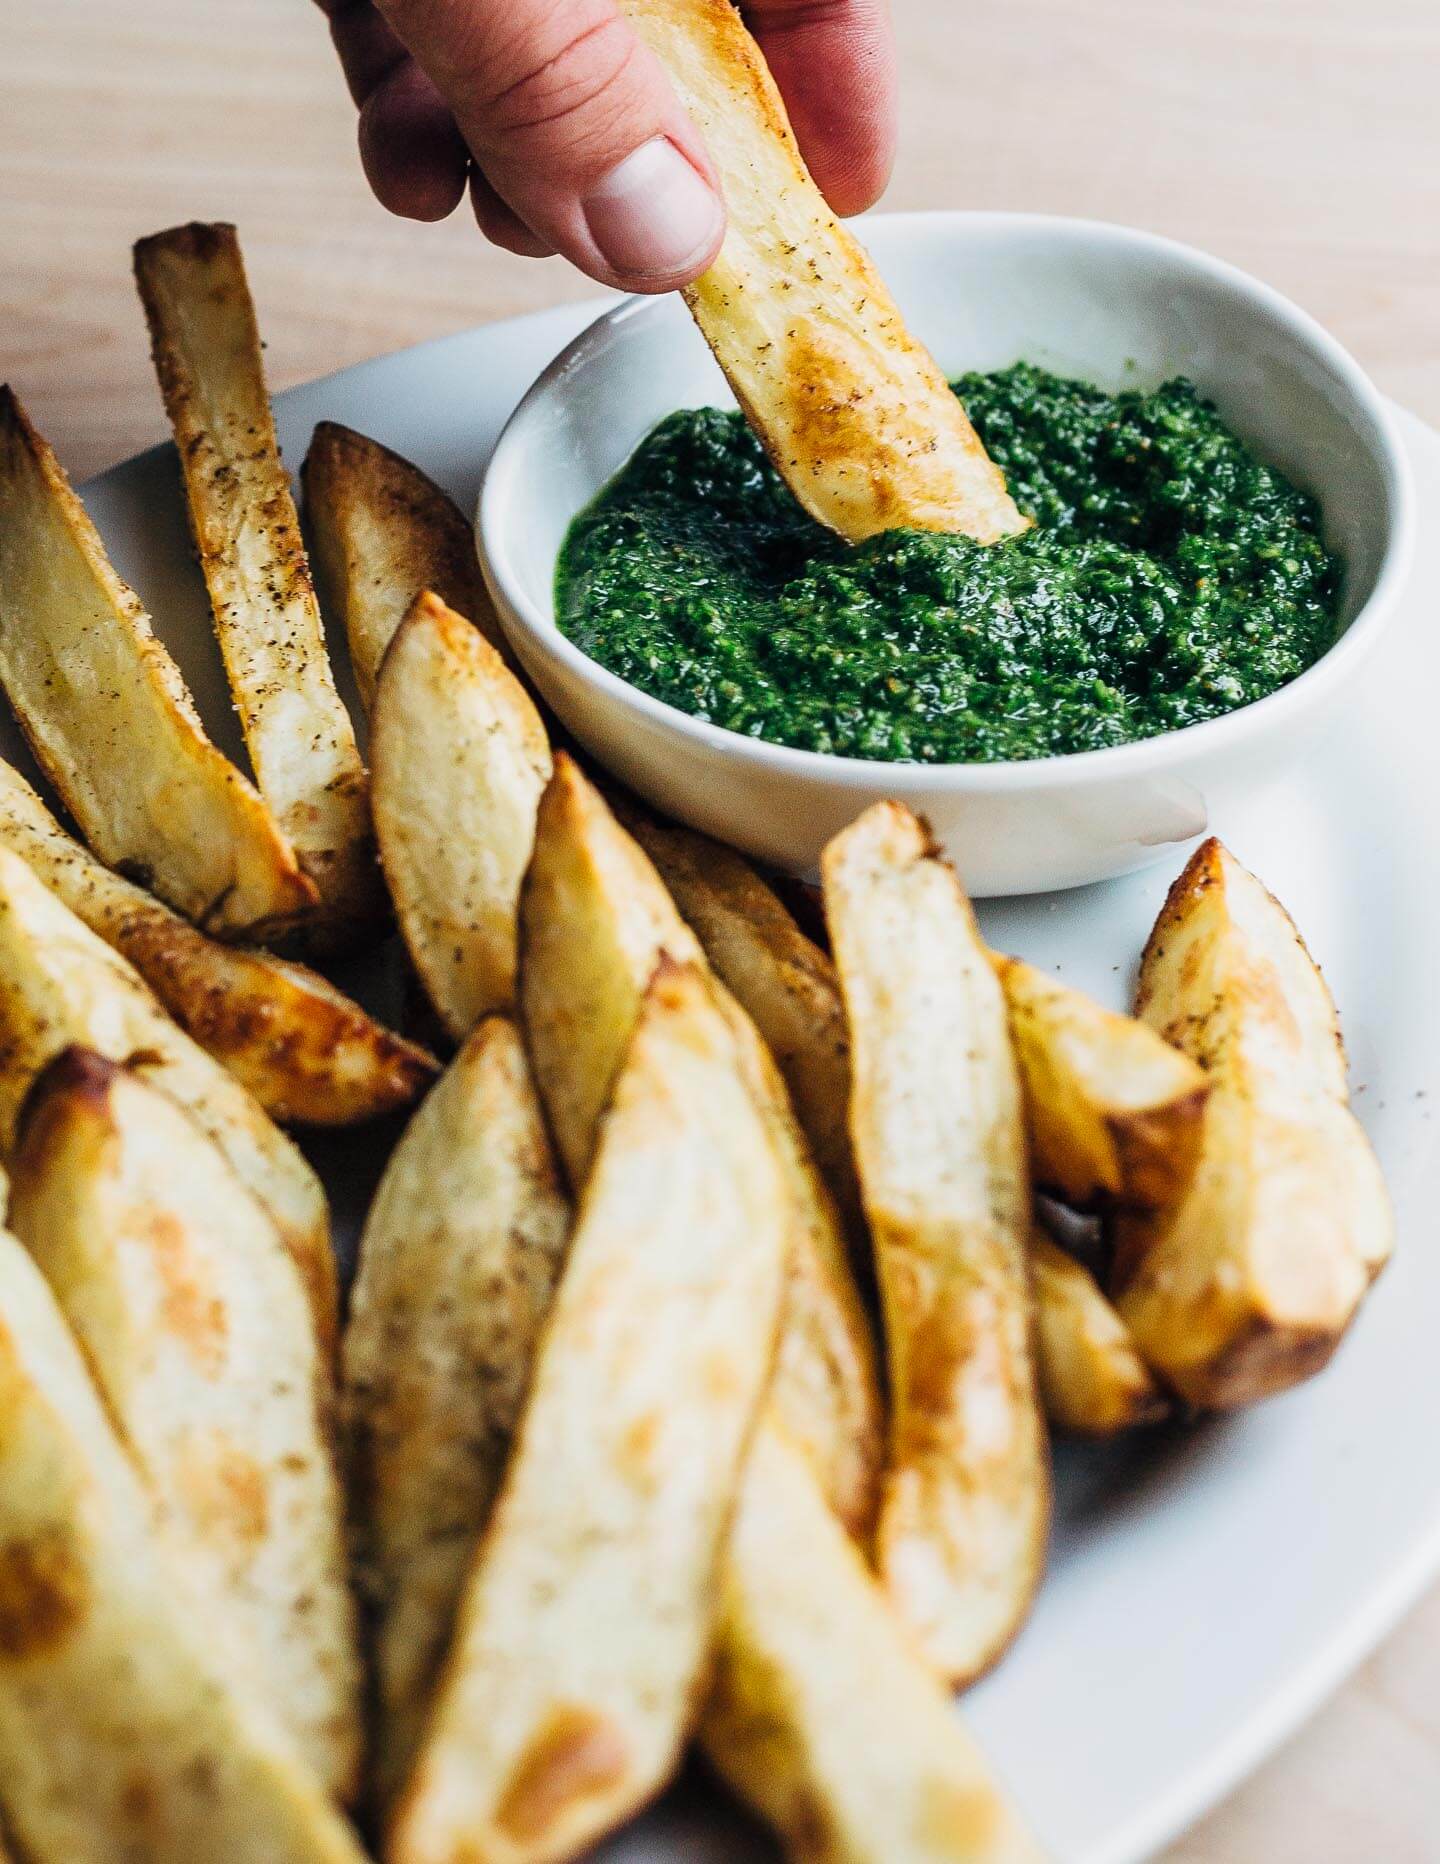 Dipping a crisp roasted potato wedge into a small dish of homemade zhug. 